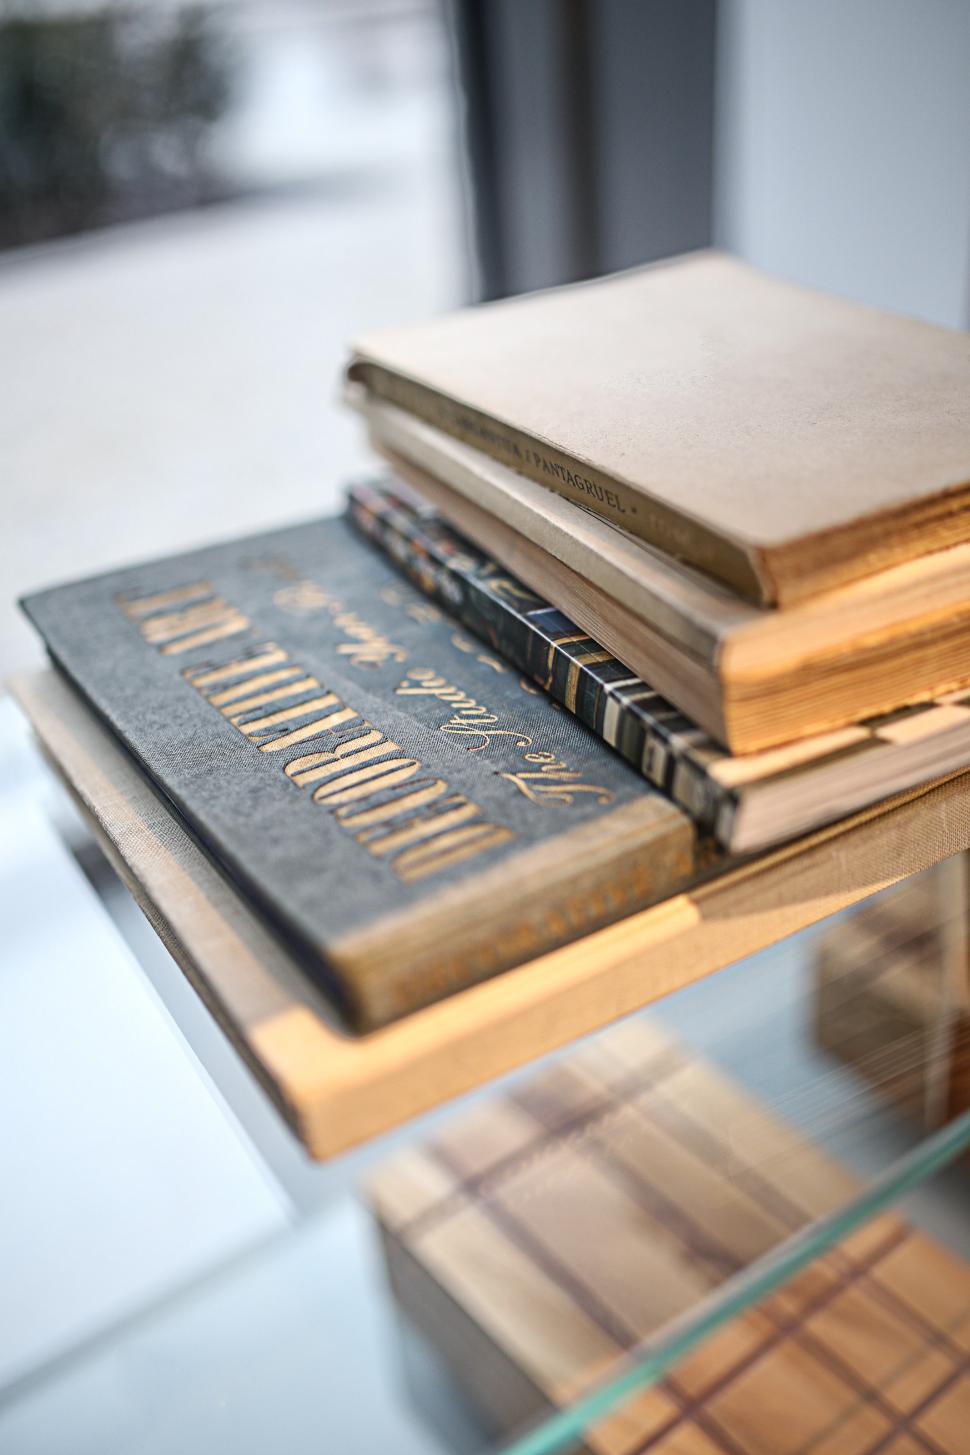 Free Image of Glass Table With Three Books 